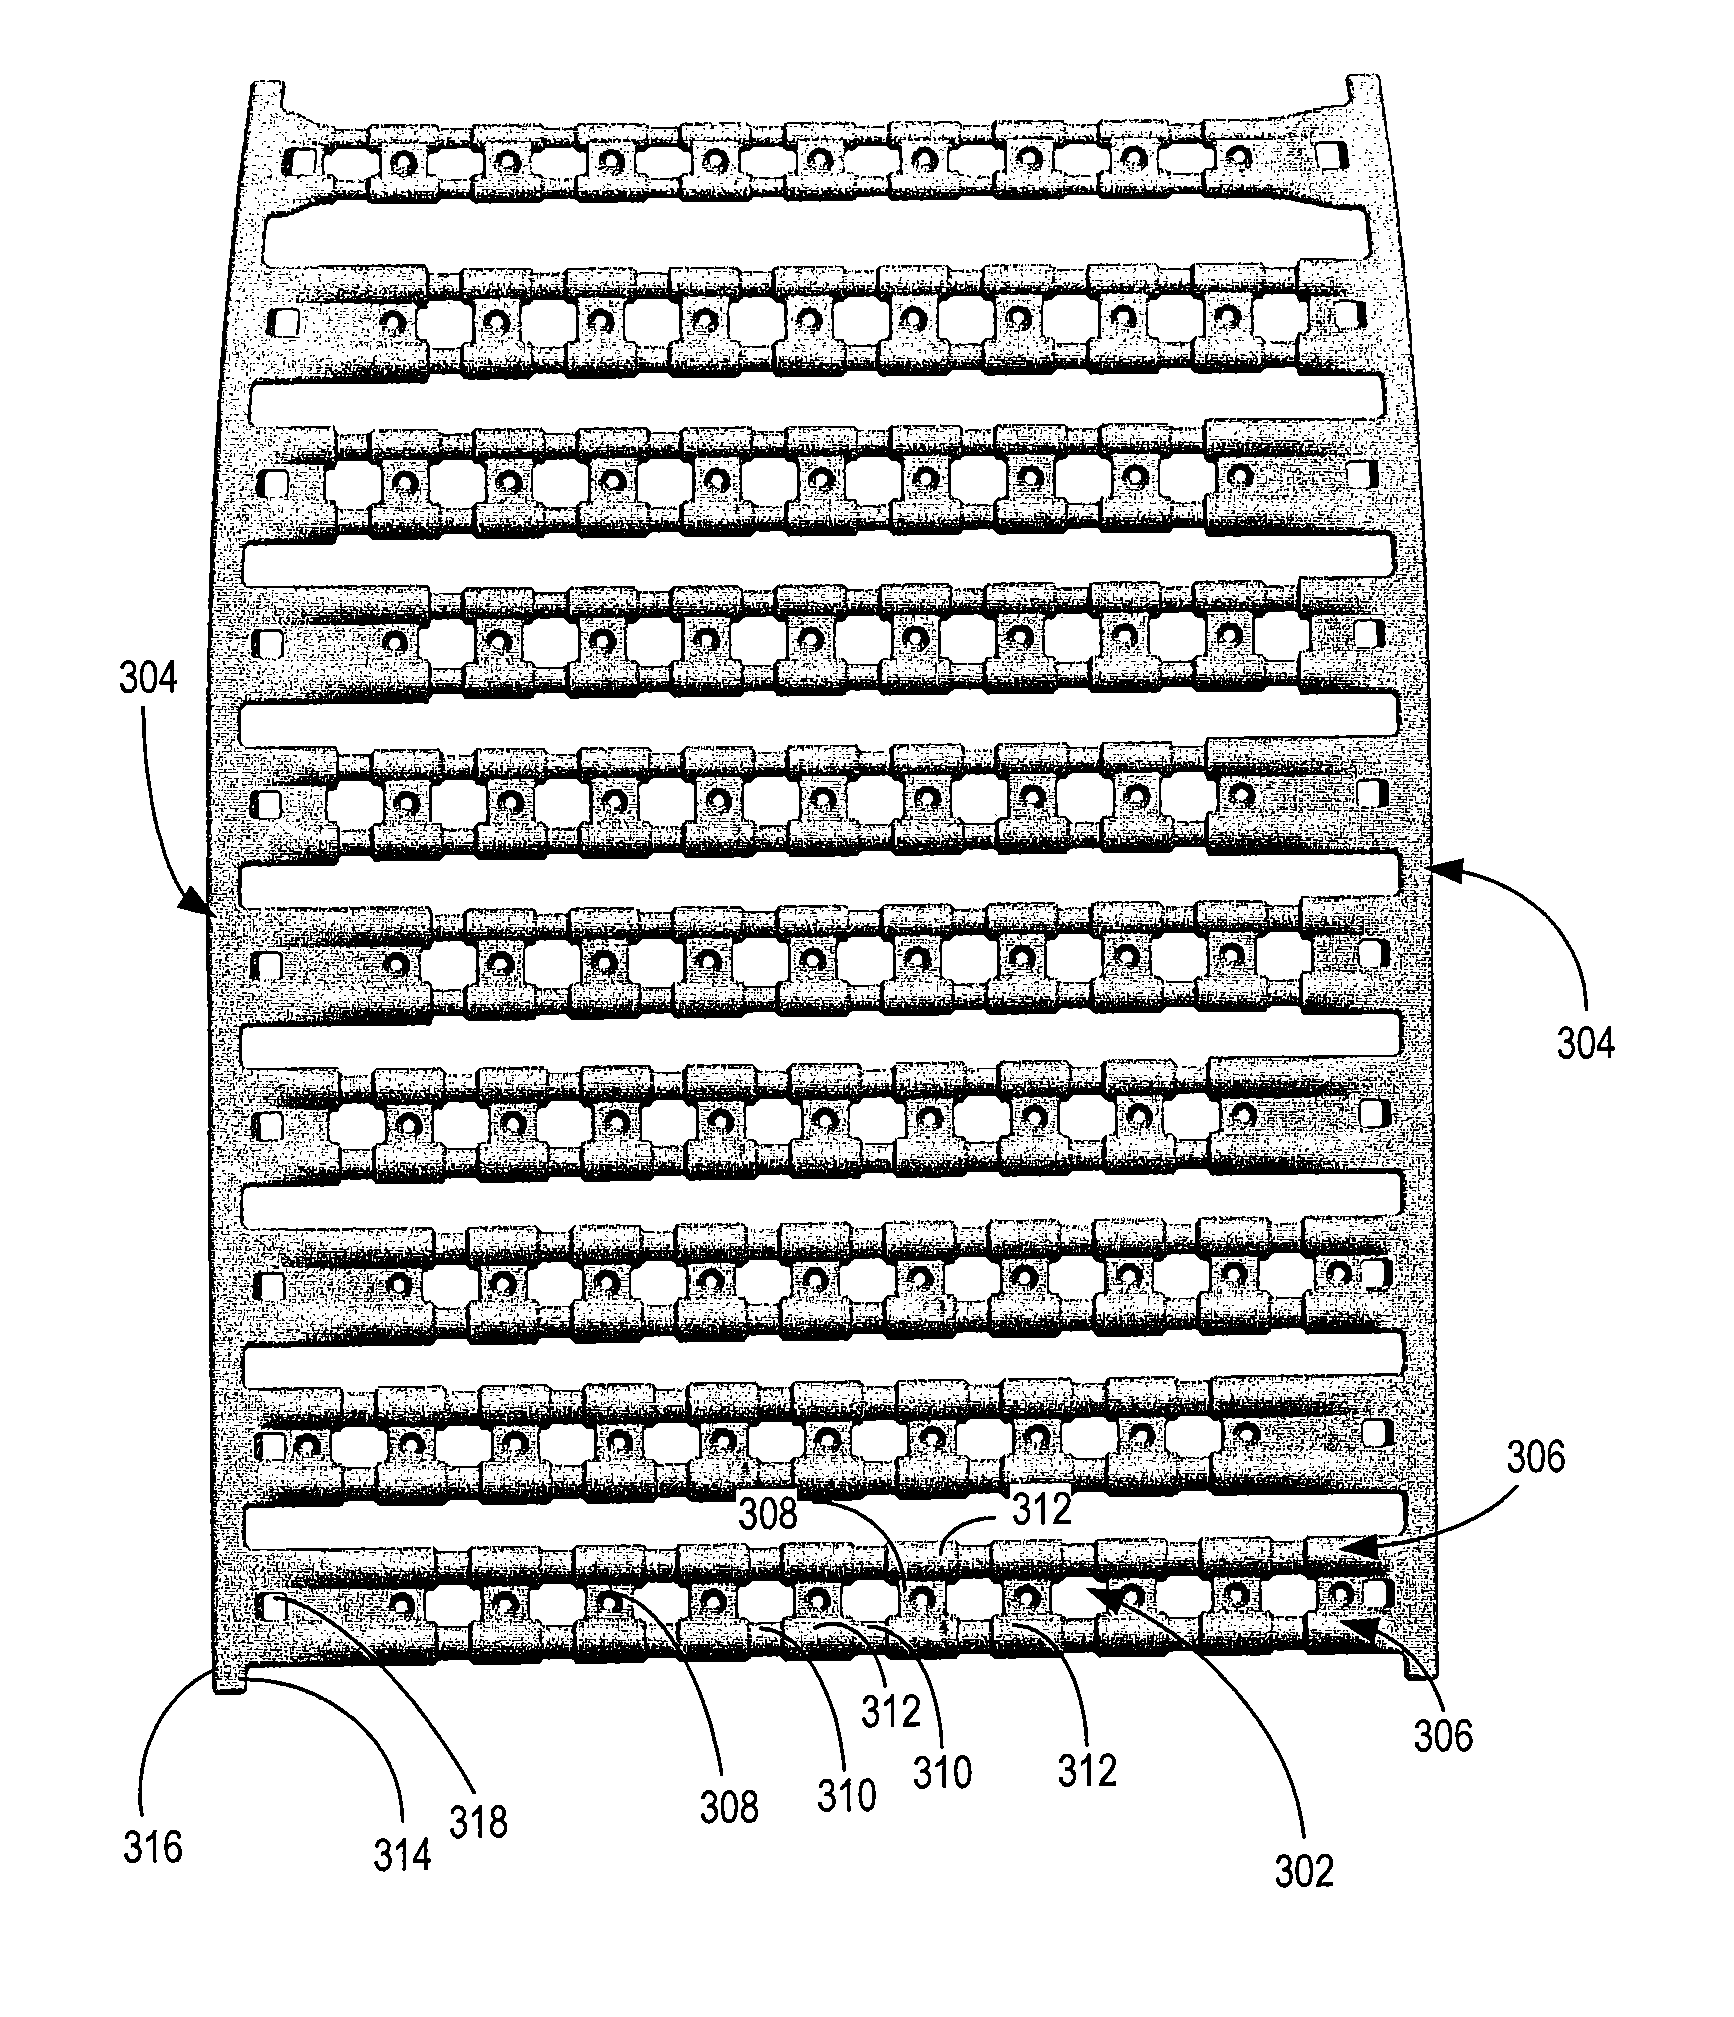 Multi-layered support structure